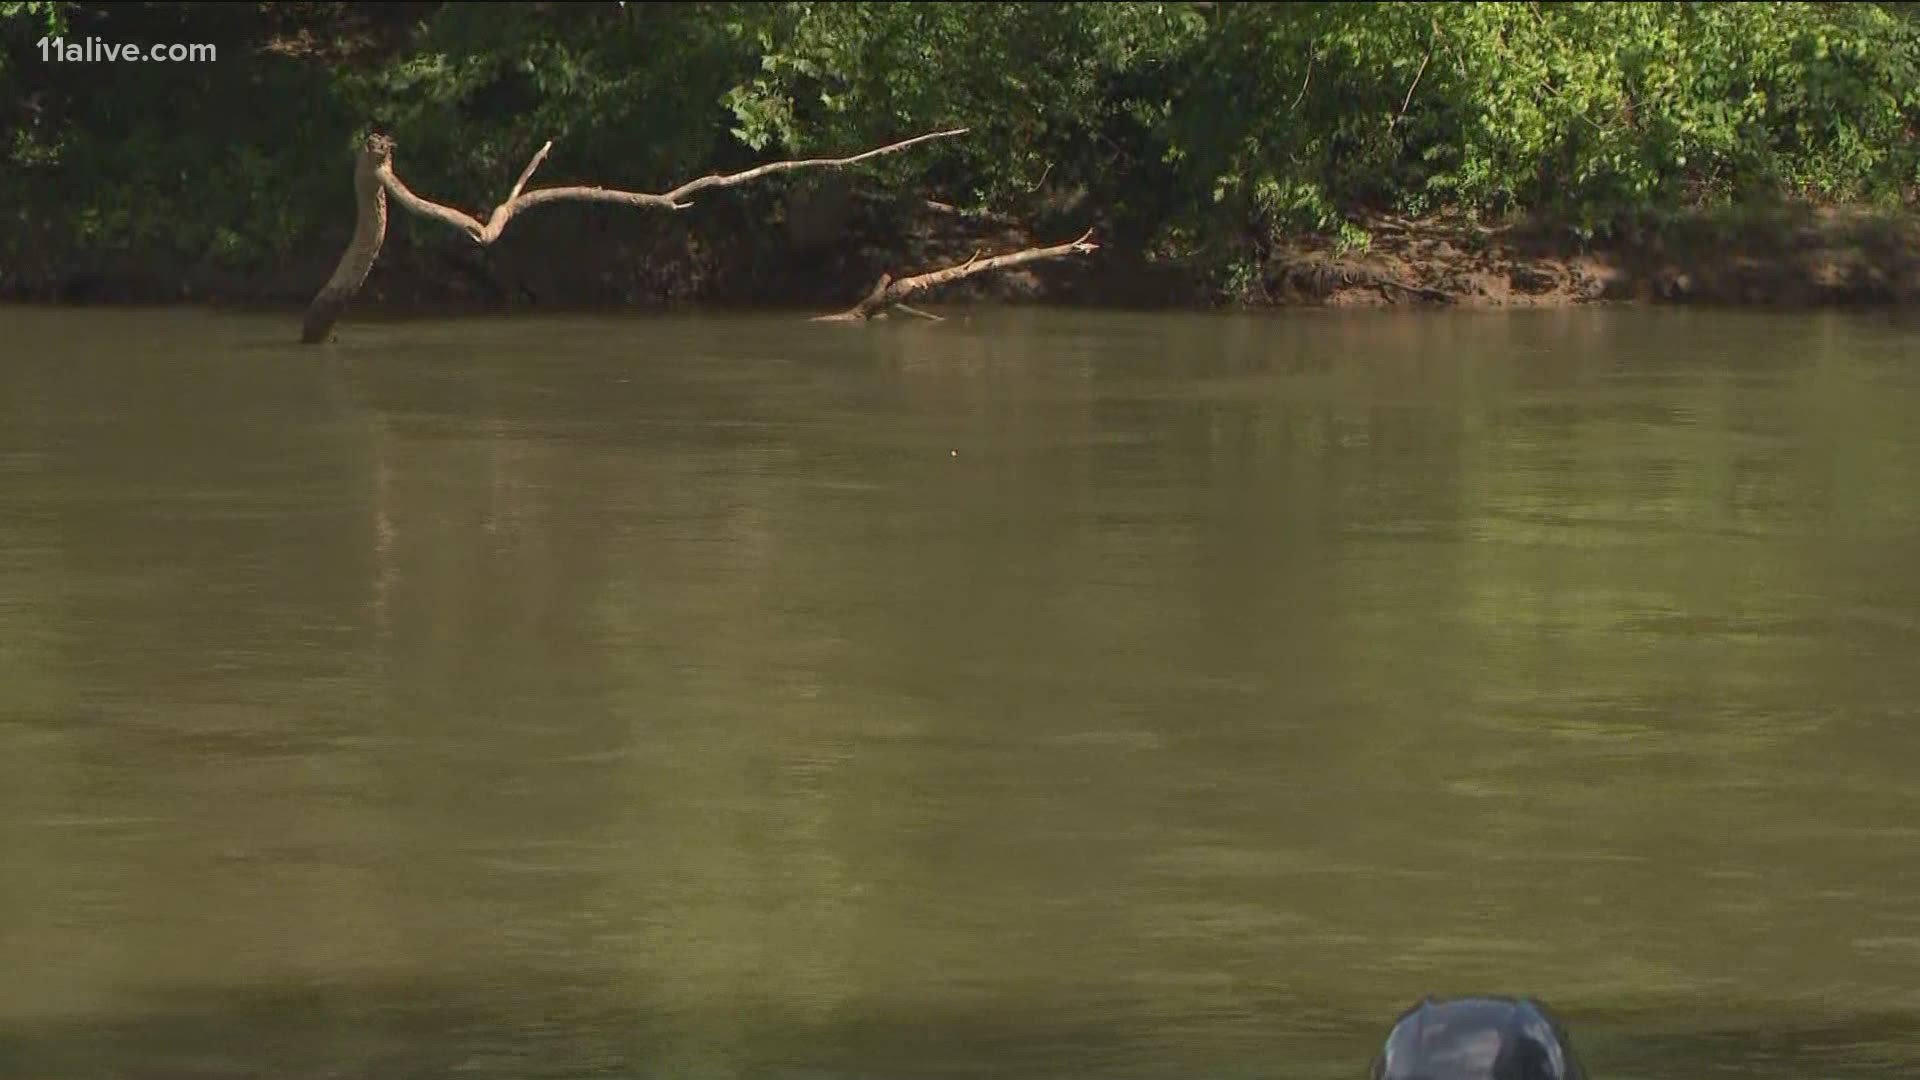 Cobb County police are investigating after a toddler's body was found in the Chattahoochee River on Thursday.